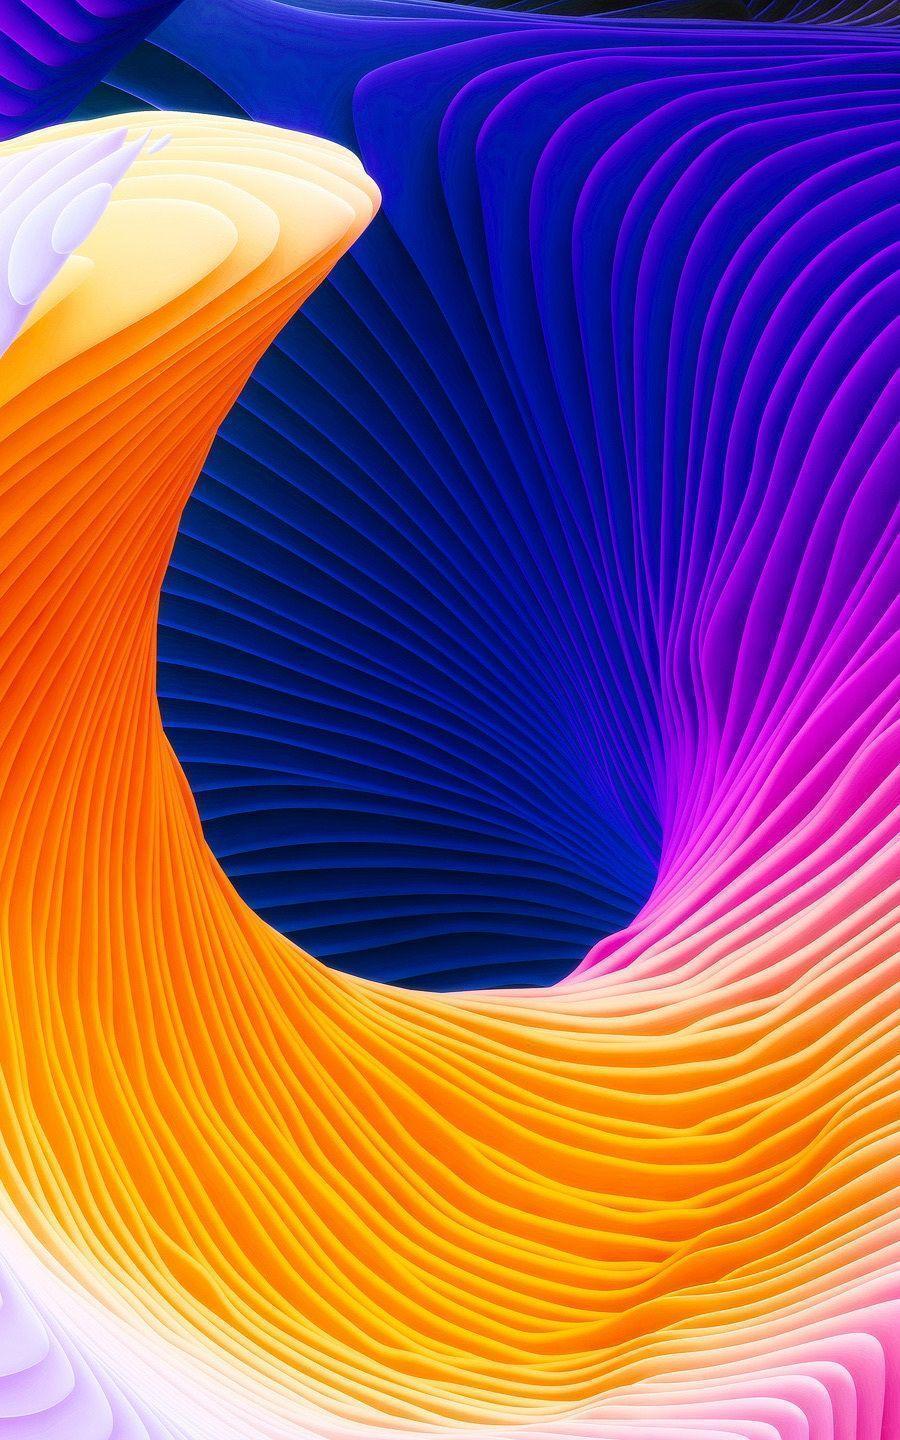 Here are 400 beautiful wallpaper to enjoy on your new iPhone 7